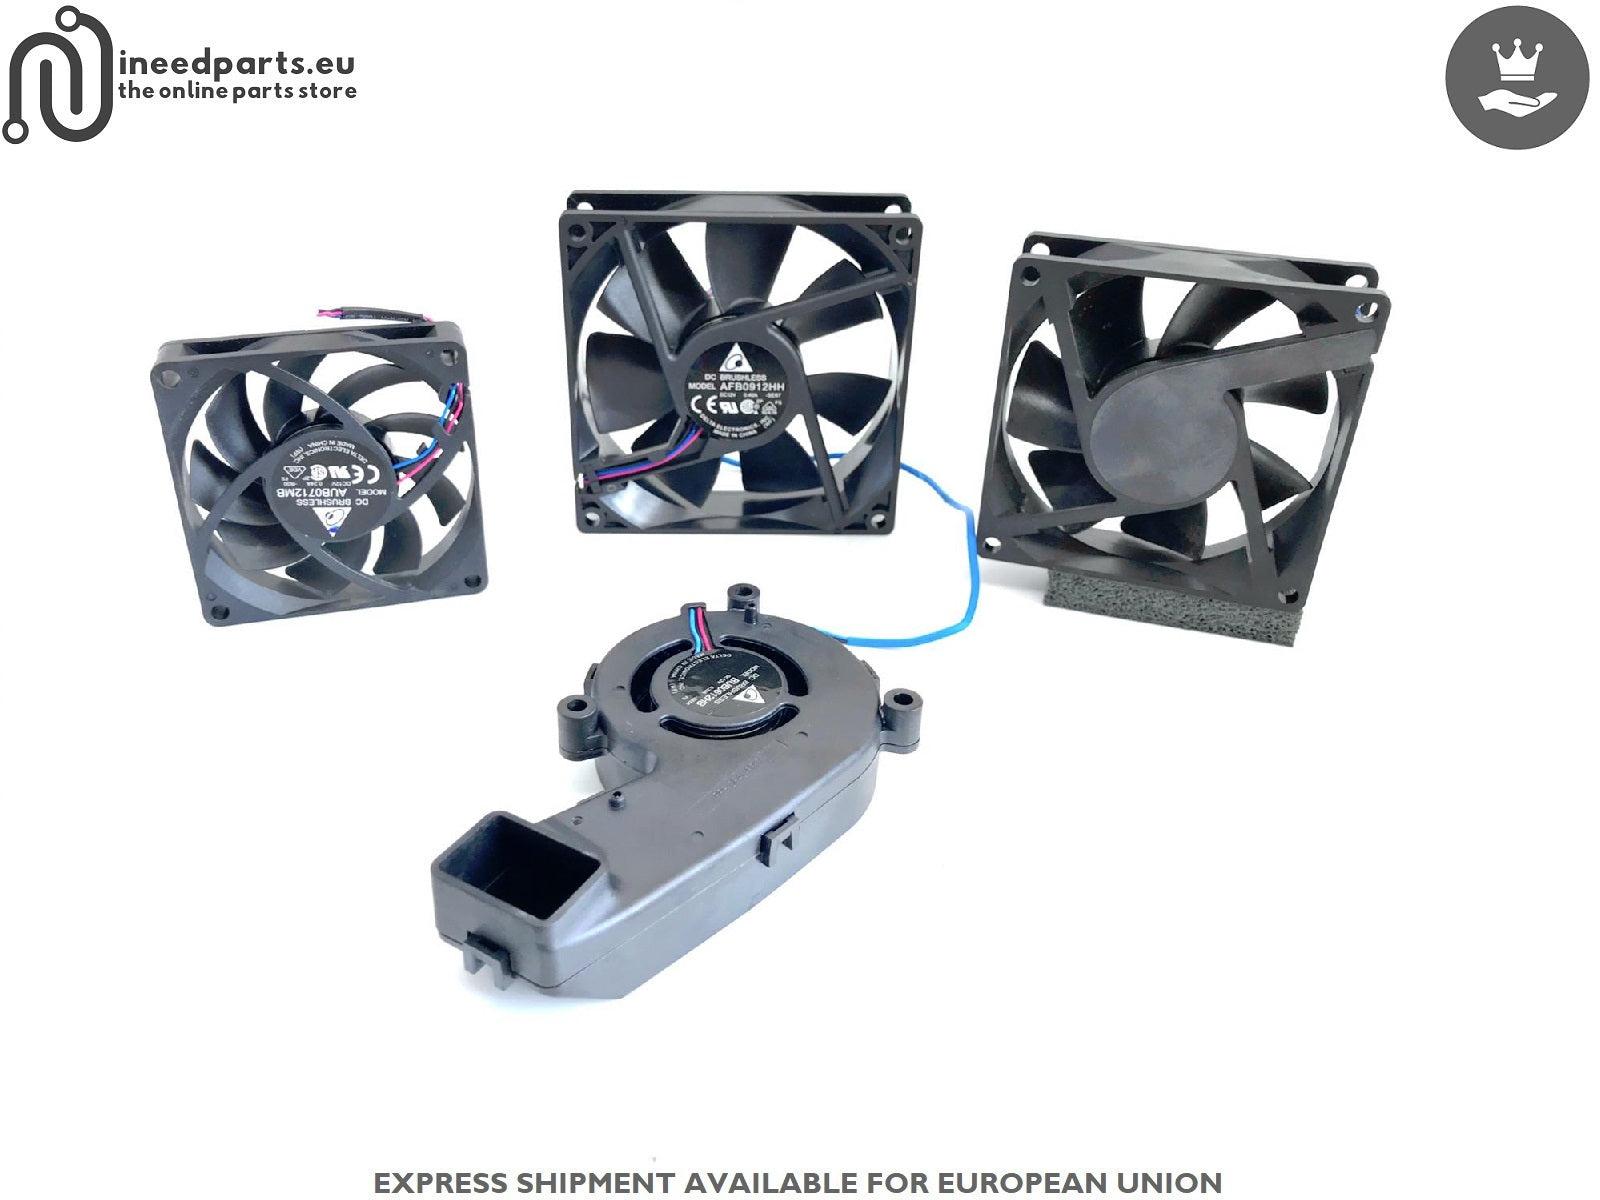 Full Pack of Fans for BenQ Projector MH740